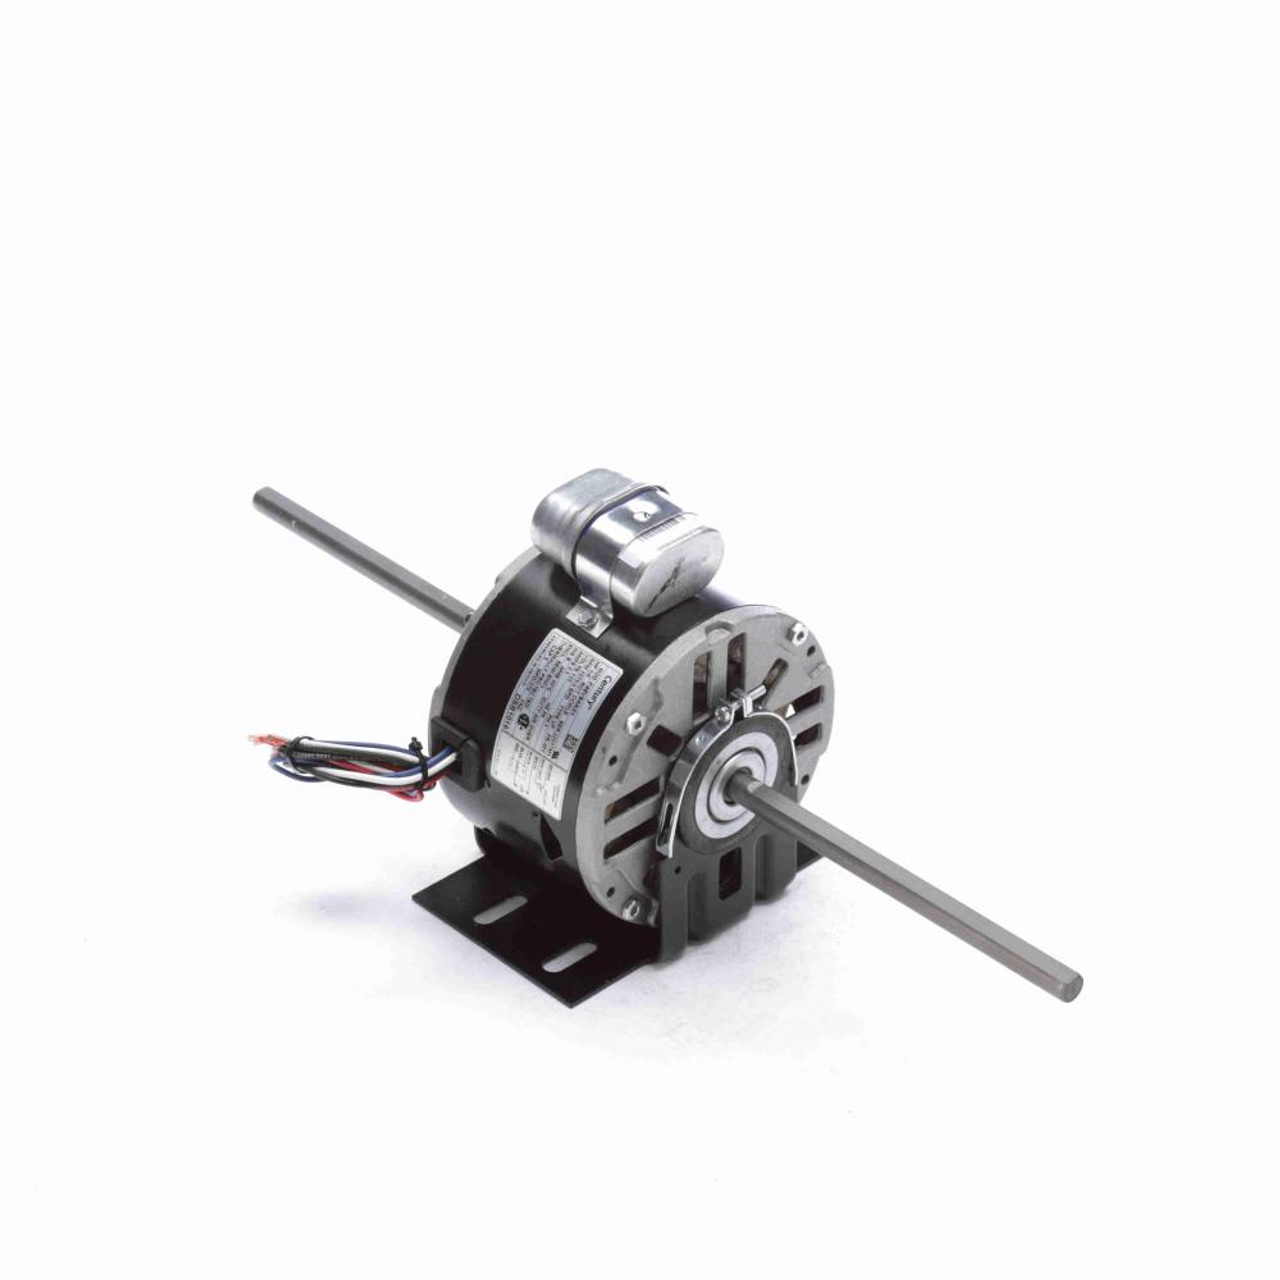 DSB1016 Fan Coil/Room Air Conditioner Motor, 1/6 HP, 1075 RPM, 48 Frame